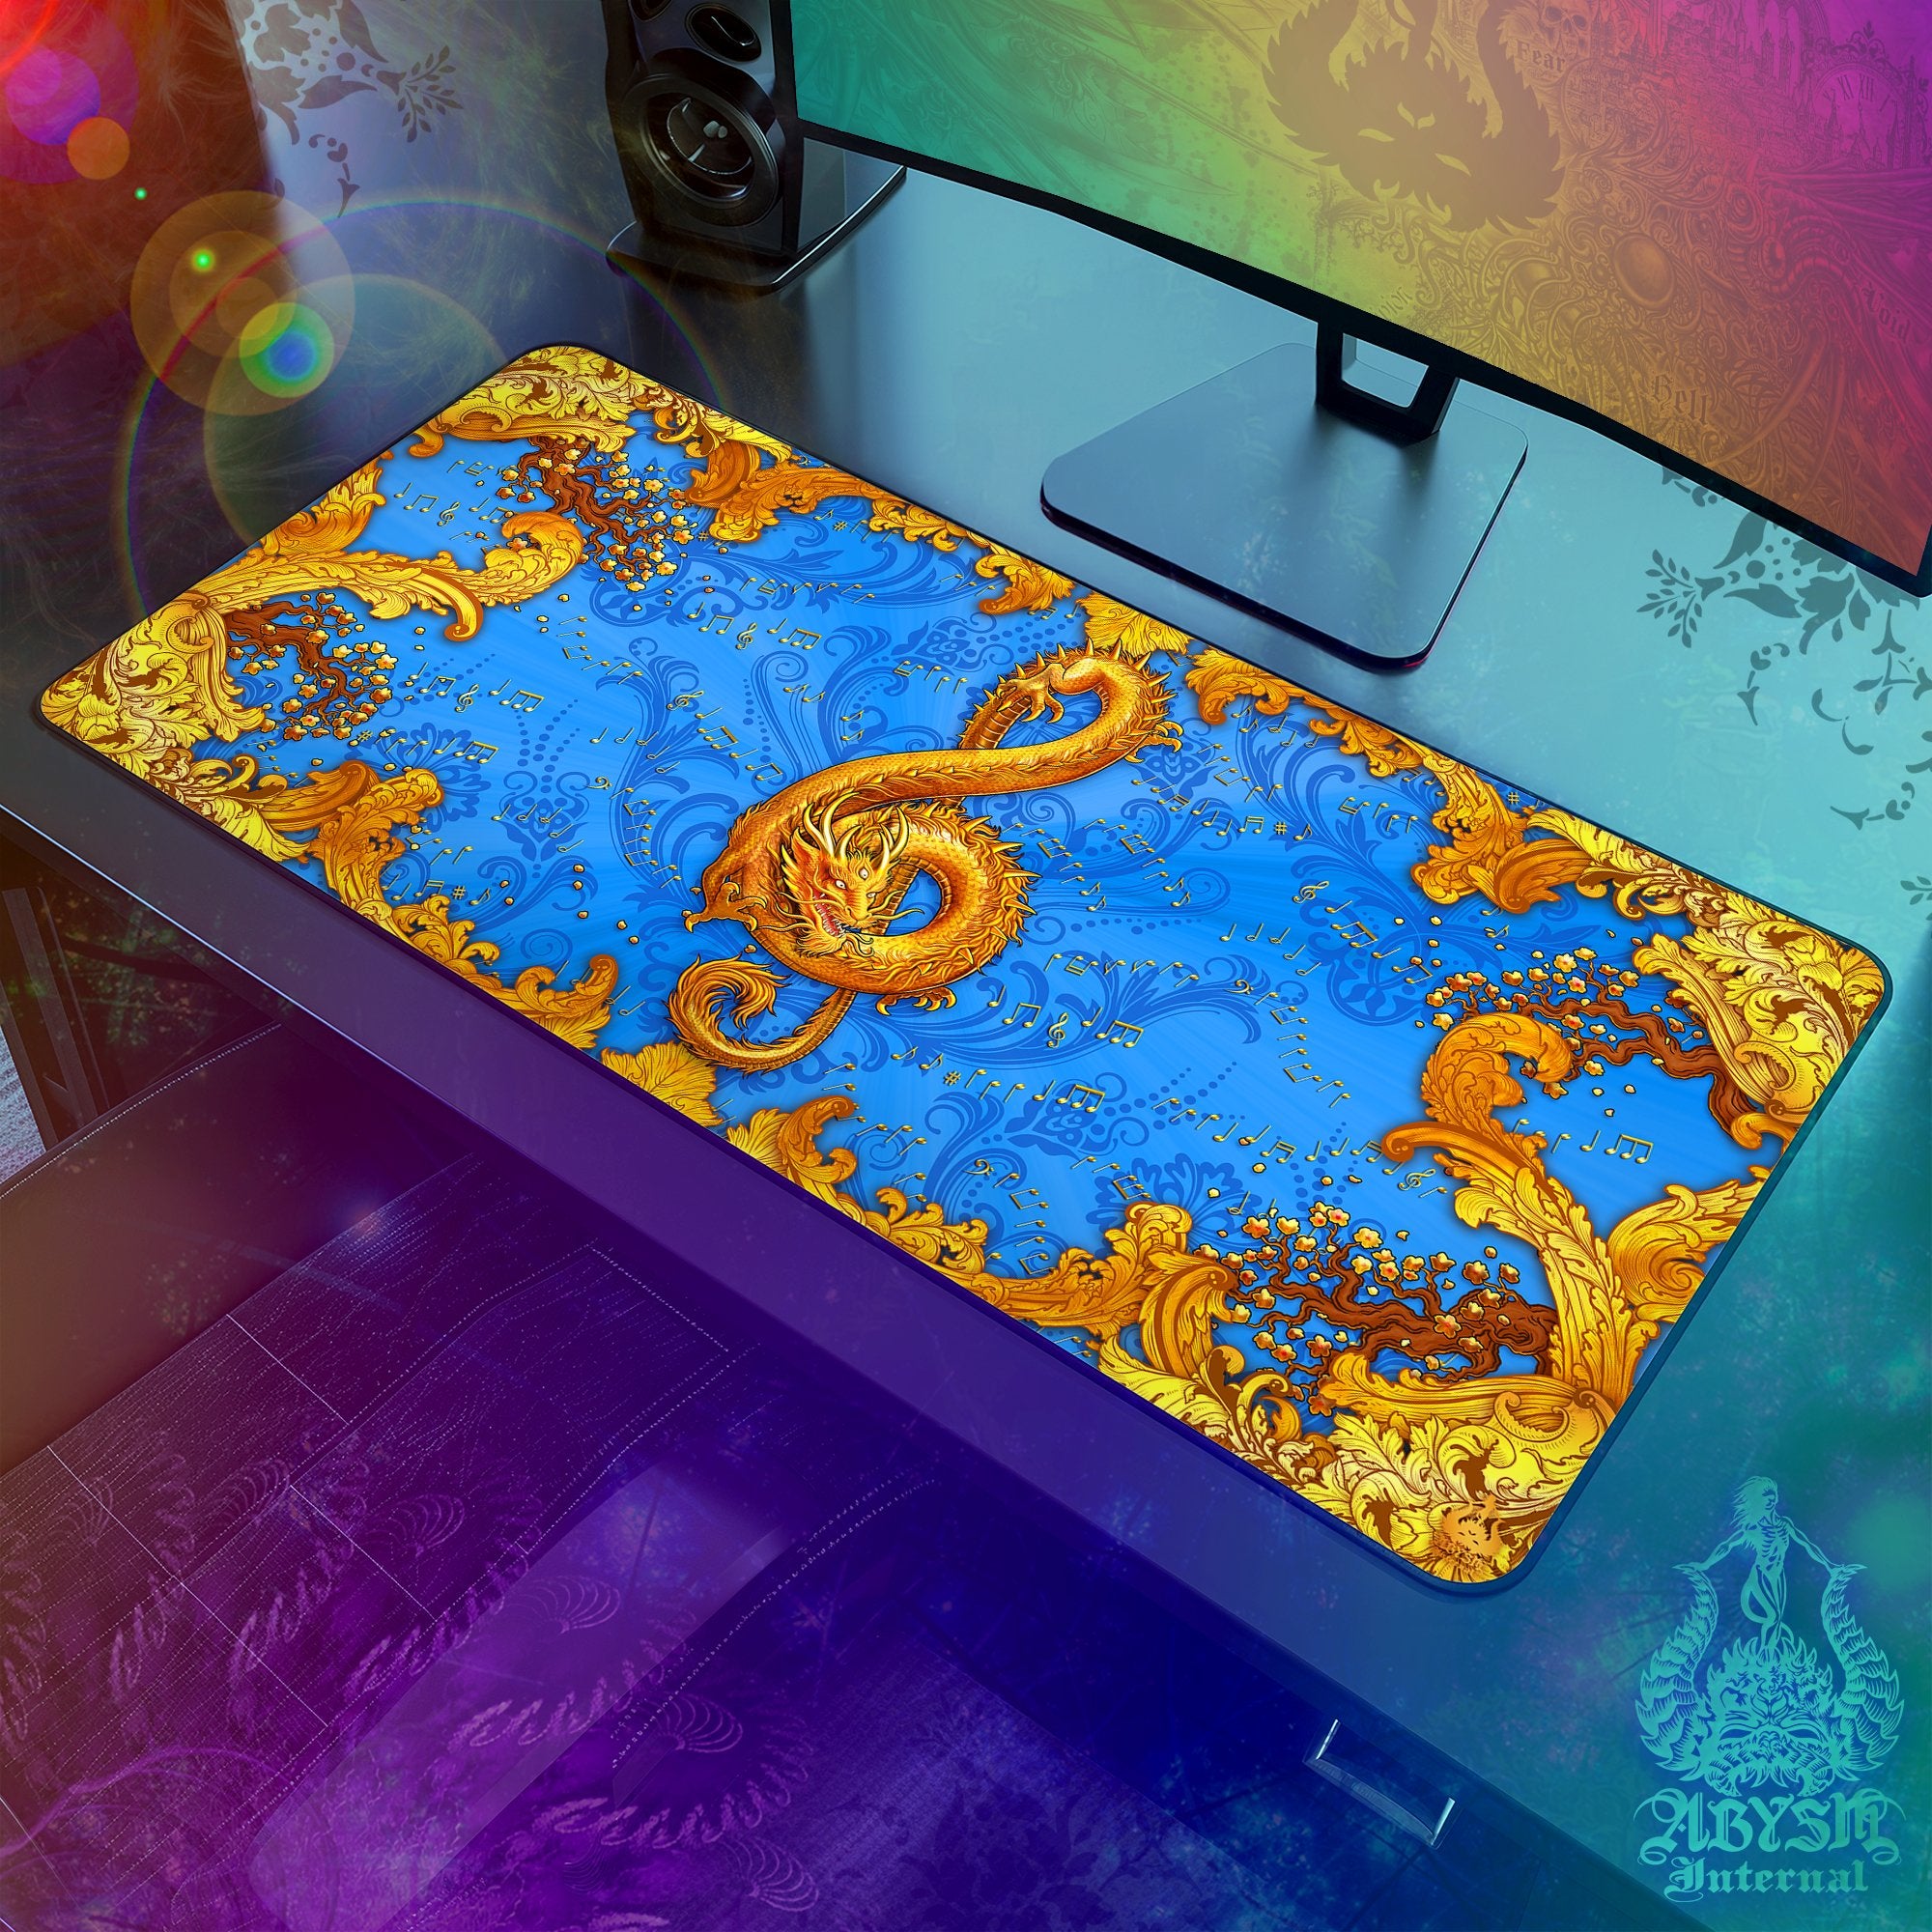 Dragon Gaming Mouse Pad, Music Desk Mat, Asian Table Protector Cover, Treble Clef Workpad, Chinese Fantasy Art Print - Cyan Gold - Abysm Internal